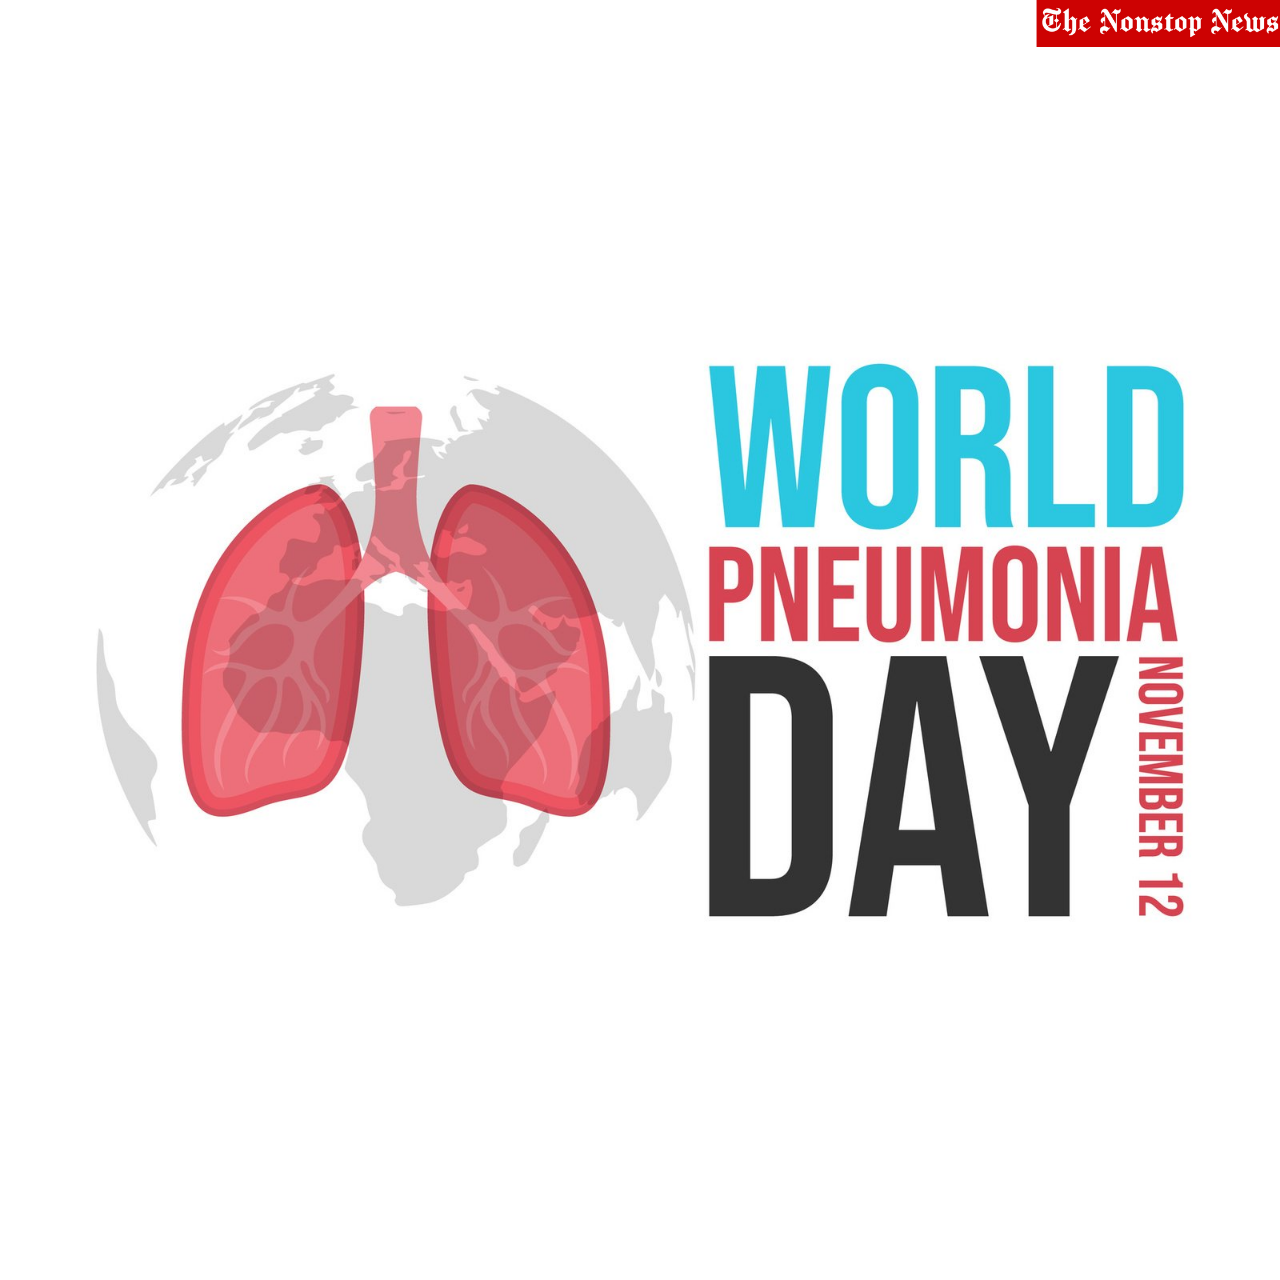 World Pneumonia Day 2021 Quotes, Slogans, HD Images, Messages, and Poster to Create Awareness